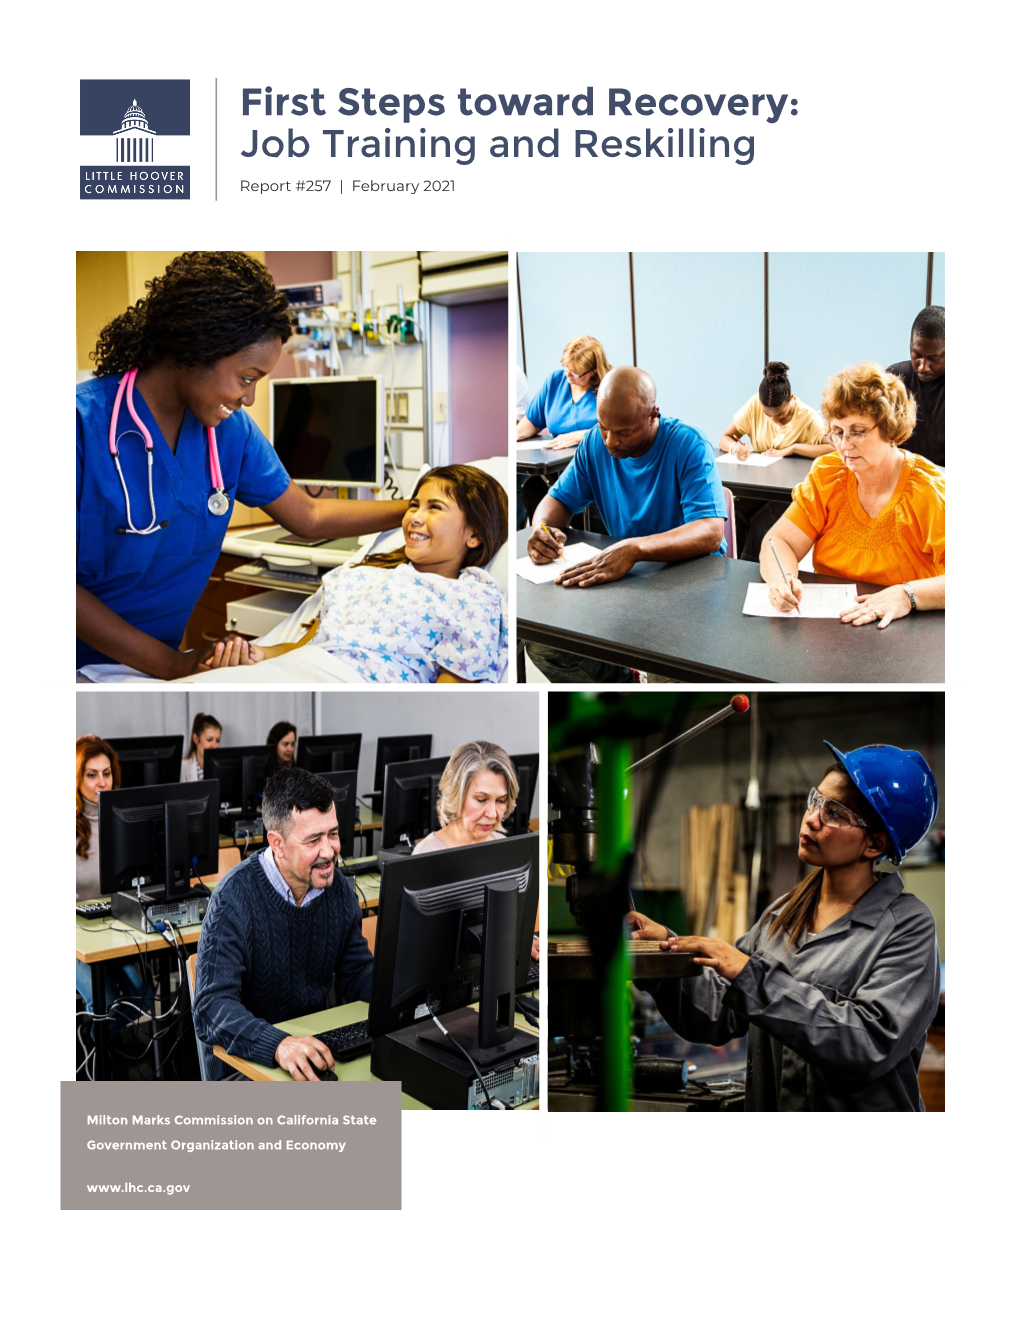 First Steps Toward Recovery: Job Training and Reskilling Report #257 | February 2021